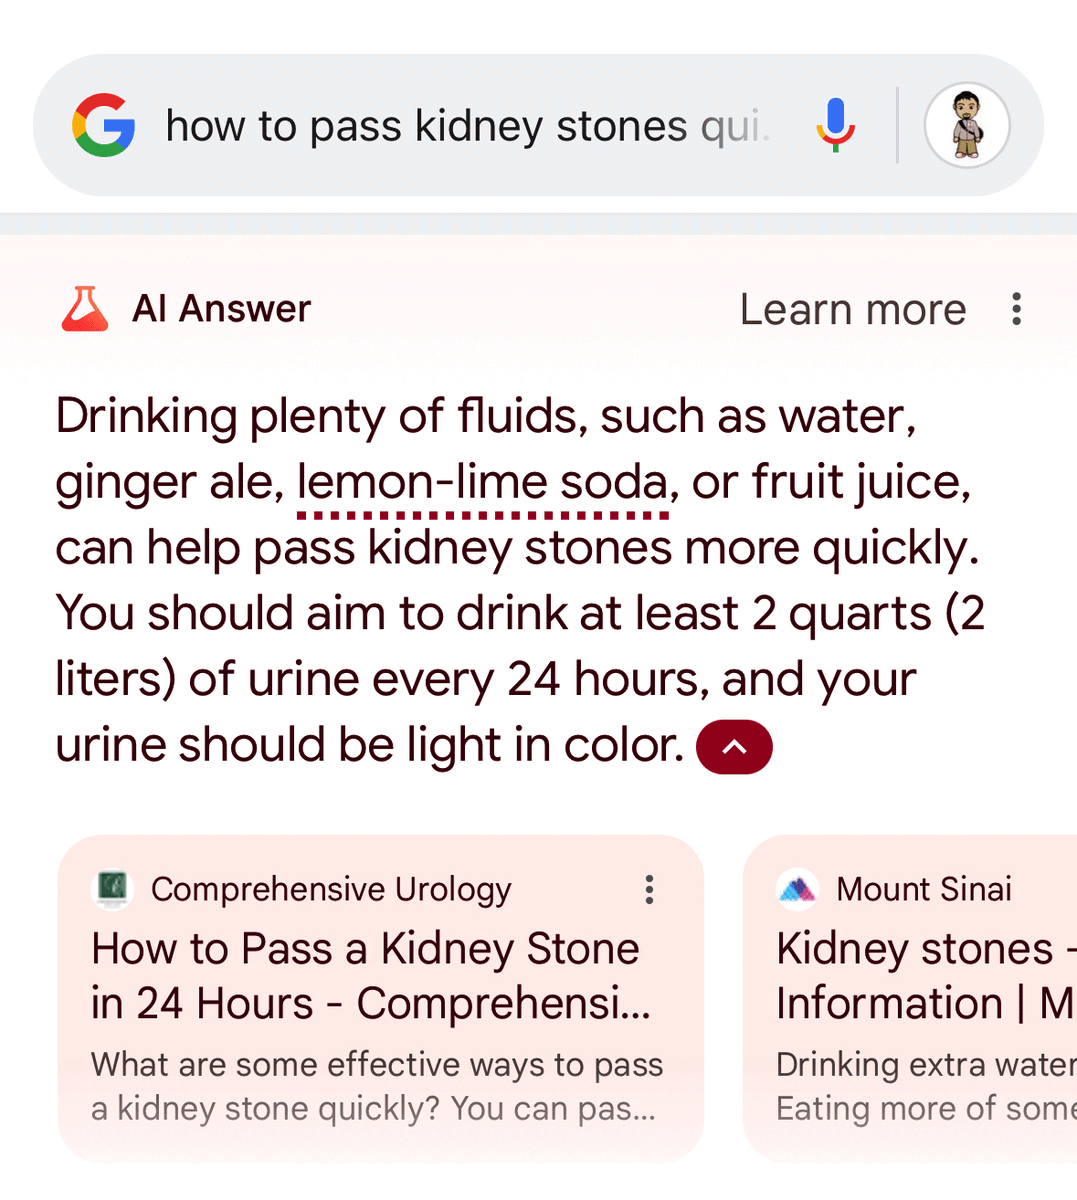 Google SGE's powerful AI answers tells you to drink 2 quarts of urine to pass kidney stones quickly 🤮 seroundtable.com/google-sge-dri… via @dril hat tip @iPullRank